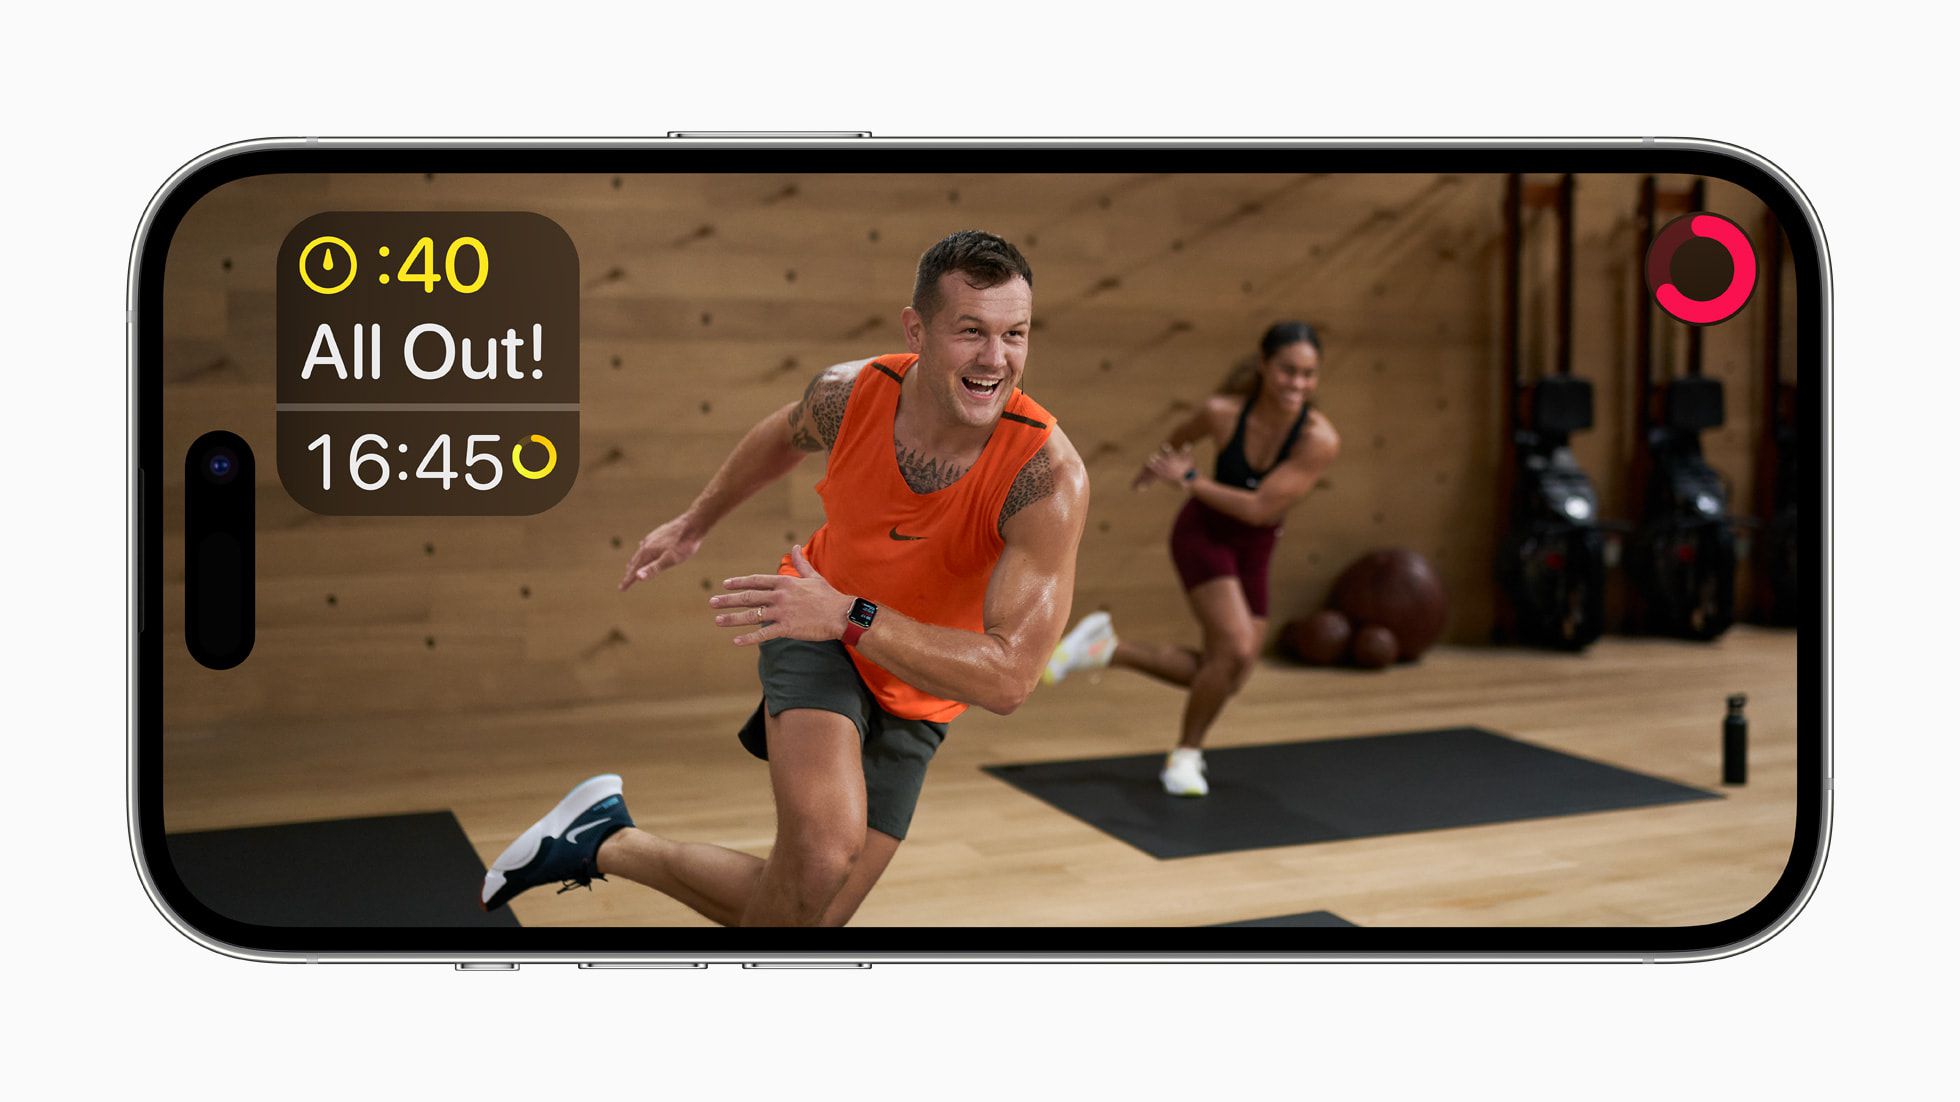 Apple Fitness+ Available Without Apple Watch Starting With iOS 16.1, tvOS 16.1